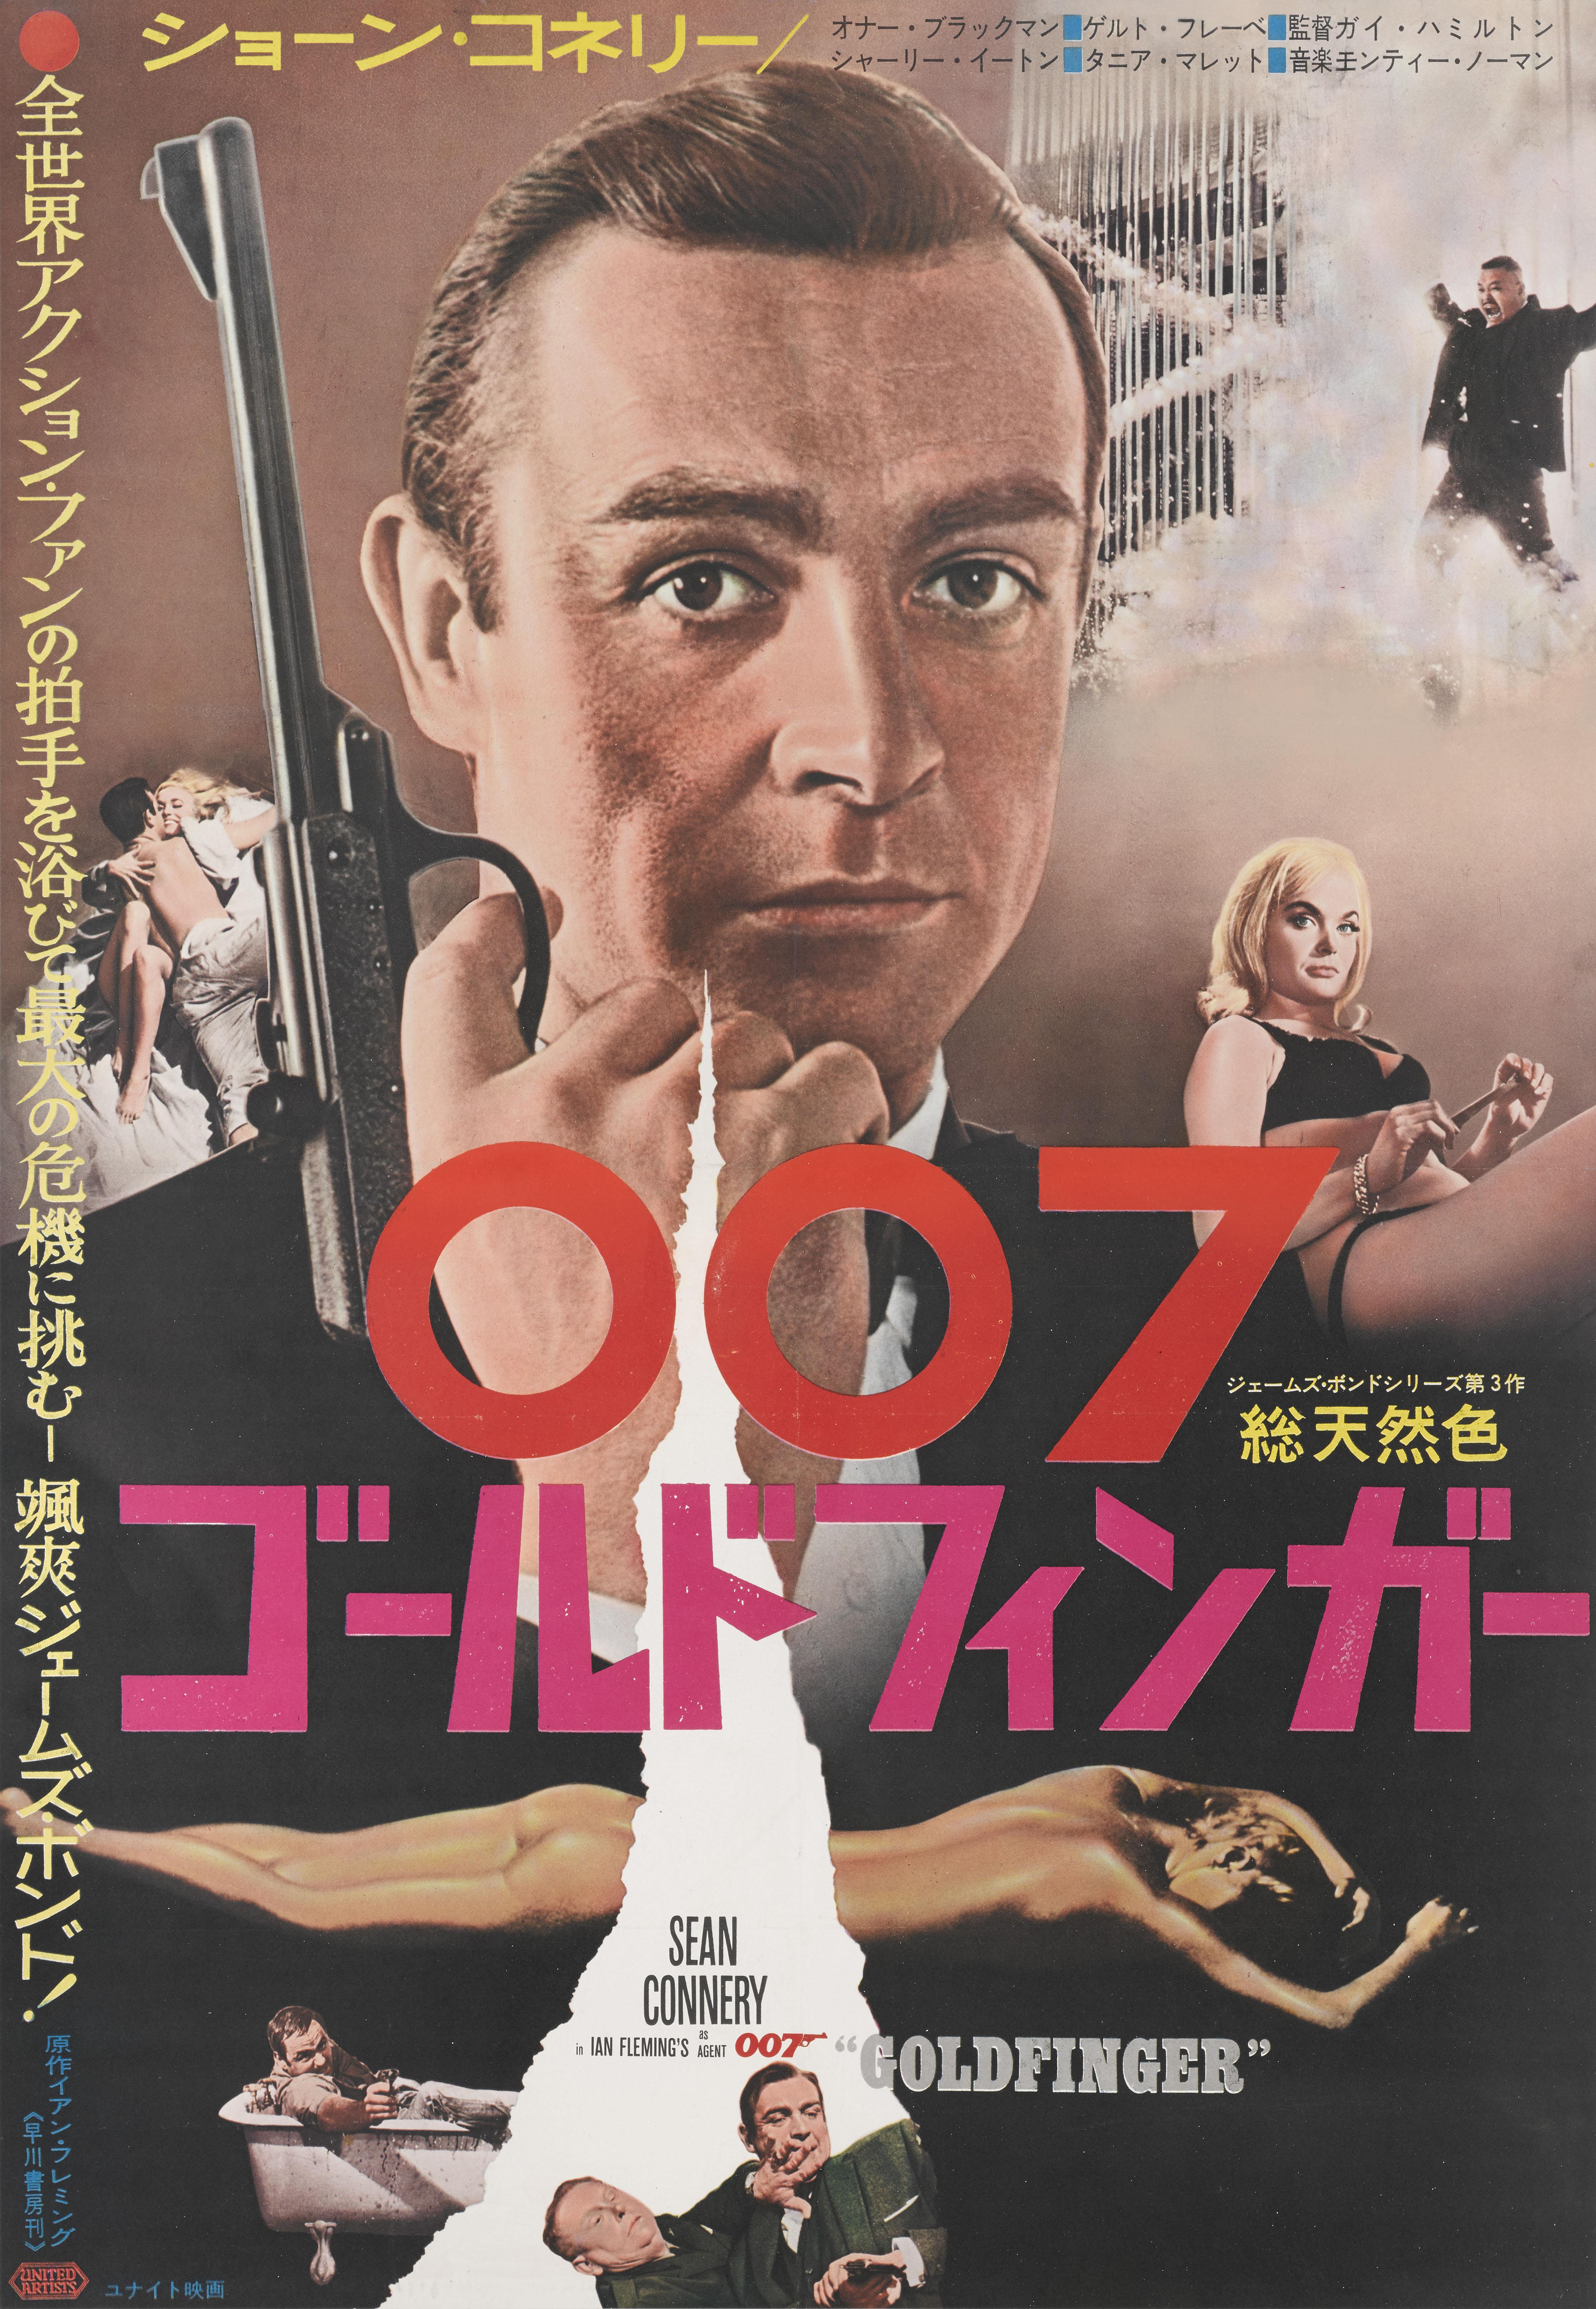 Original Japanese film poster.
This poster would have been used outside the cinema at the films original release in Japan, the artwork is unique to the films Japanese release.
Goldfinger was the third James Bond film and the third to star Sean